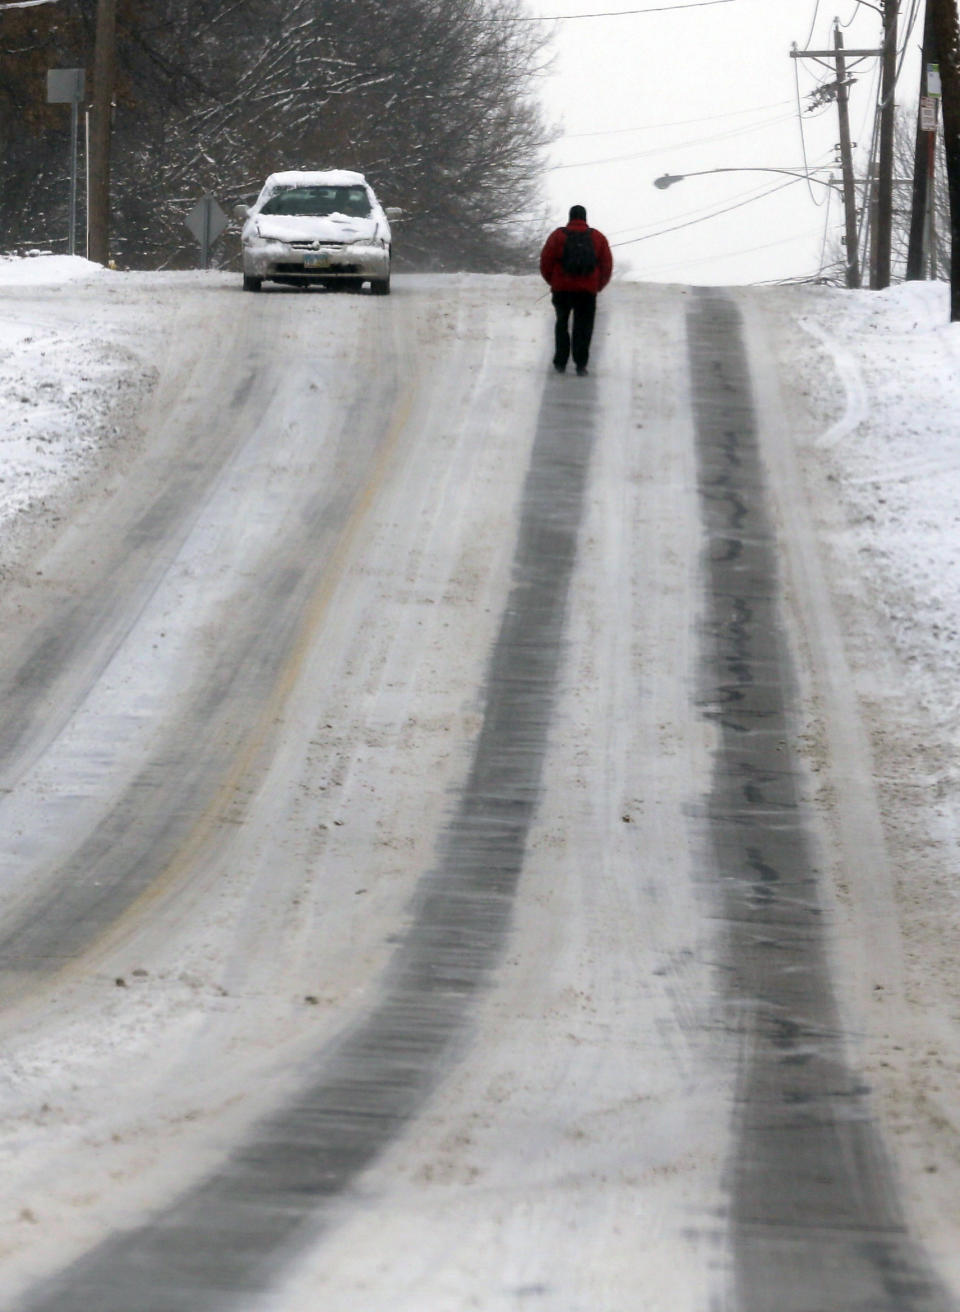 A pedestrian walks in the middle of a road to avoid snow covered sidewalks Tuesday, Jan. 21, 2014, in Cincinnati. The Cincinnati area received around three to five inches of snow. (AP Photo/Al Behrman)